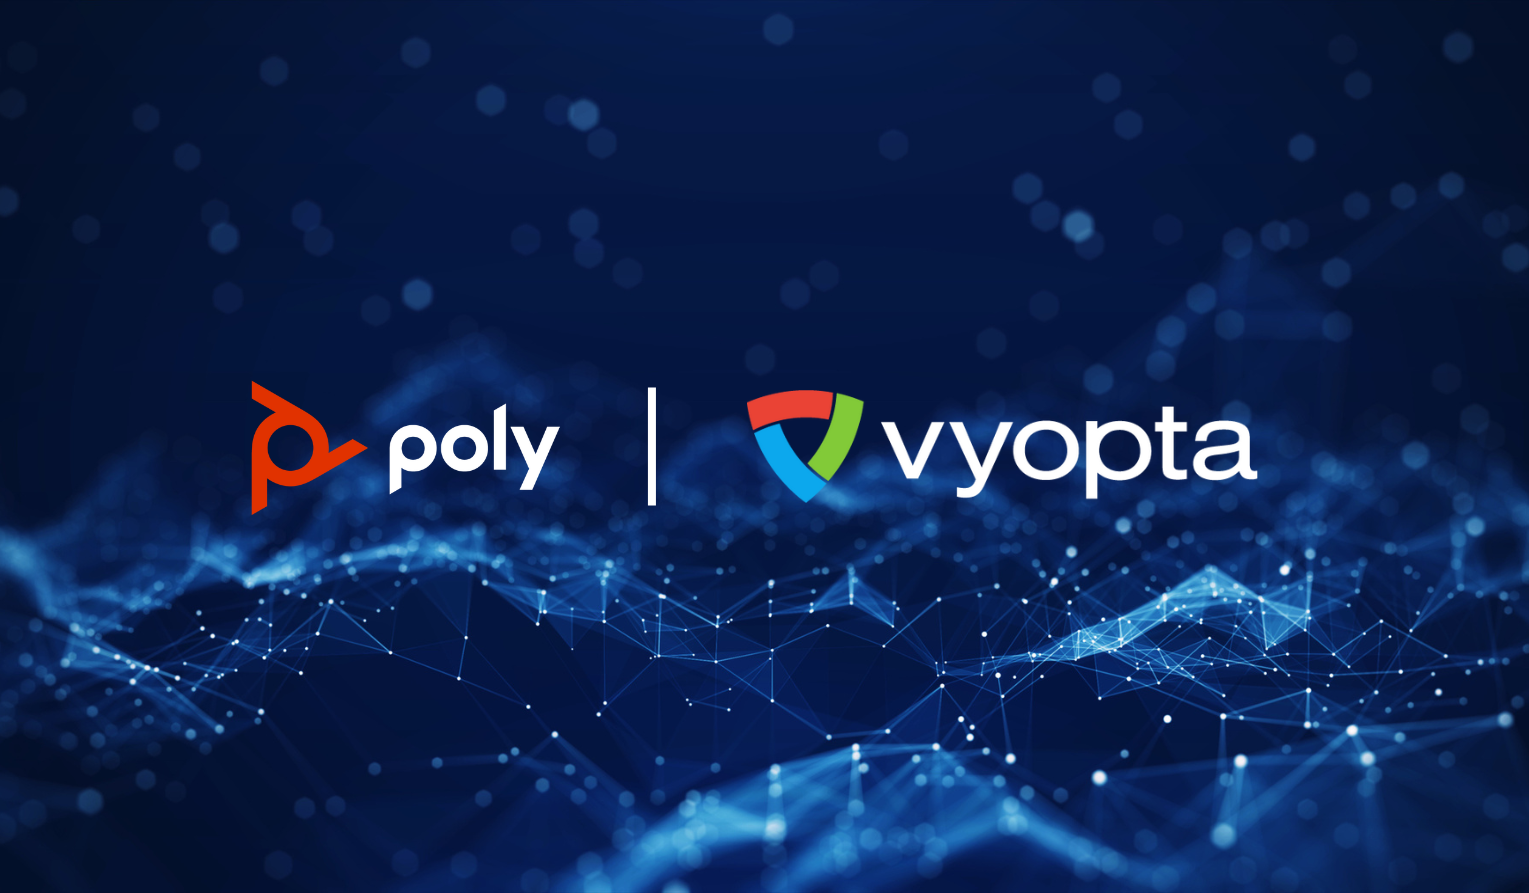 Poly and Vyopta Announce Partnership to Empower Customers to Inform Decisions on Space and Technology Utilization